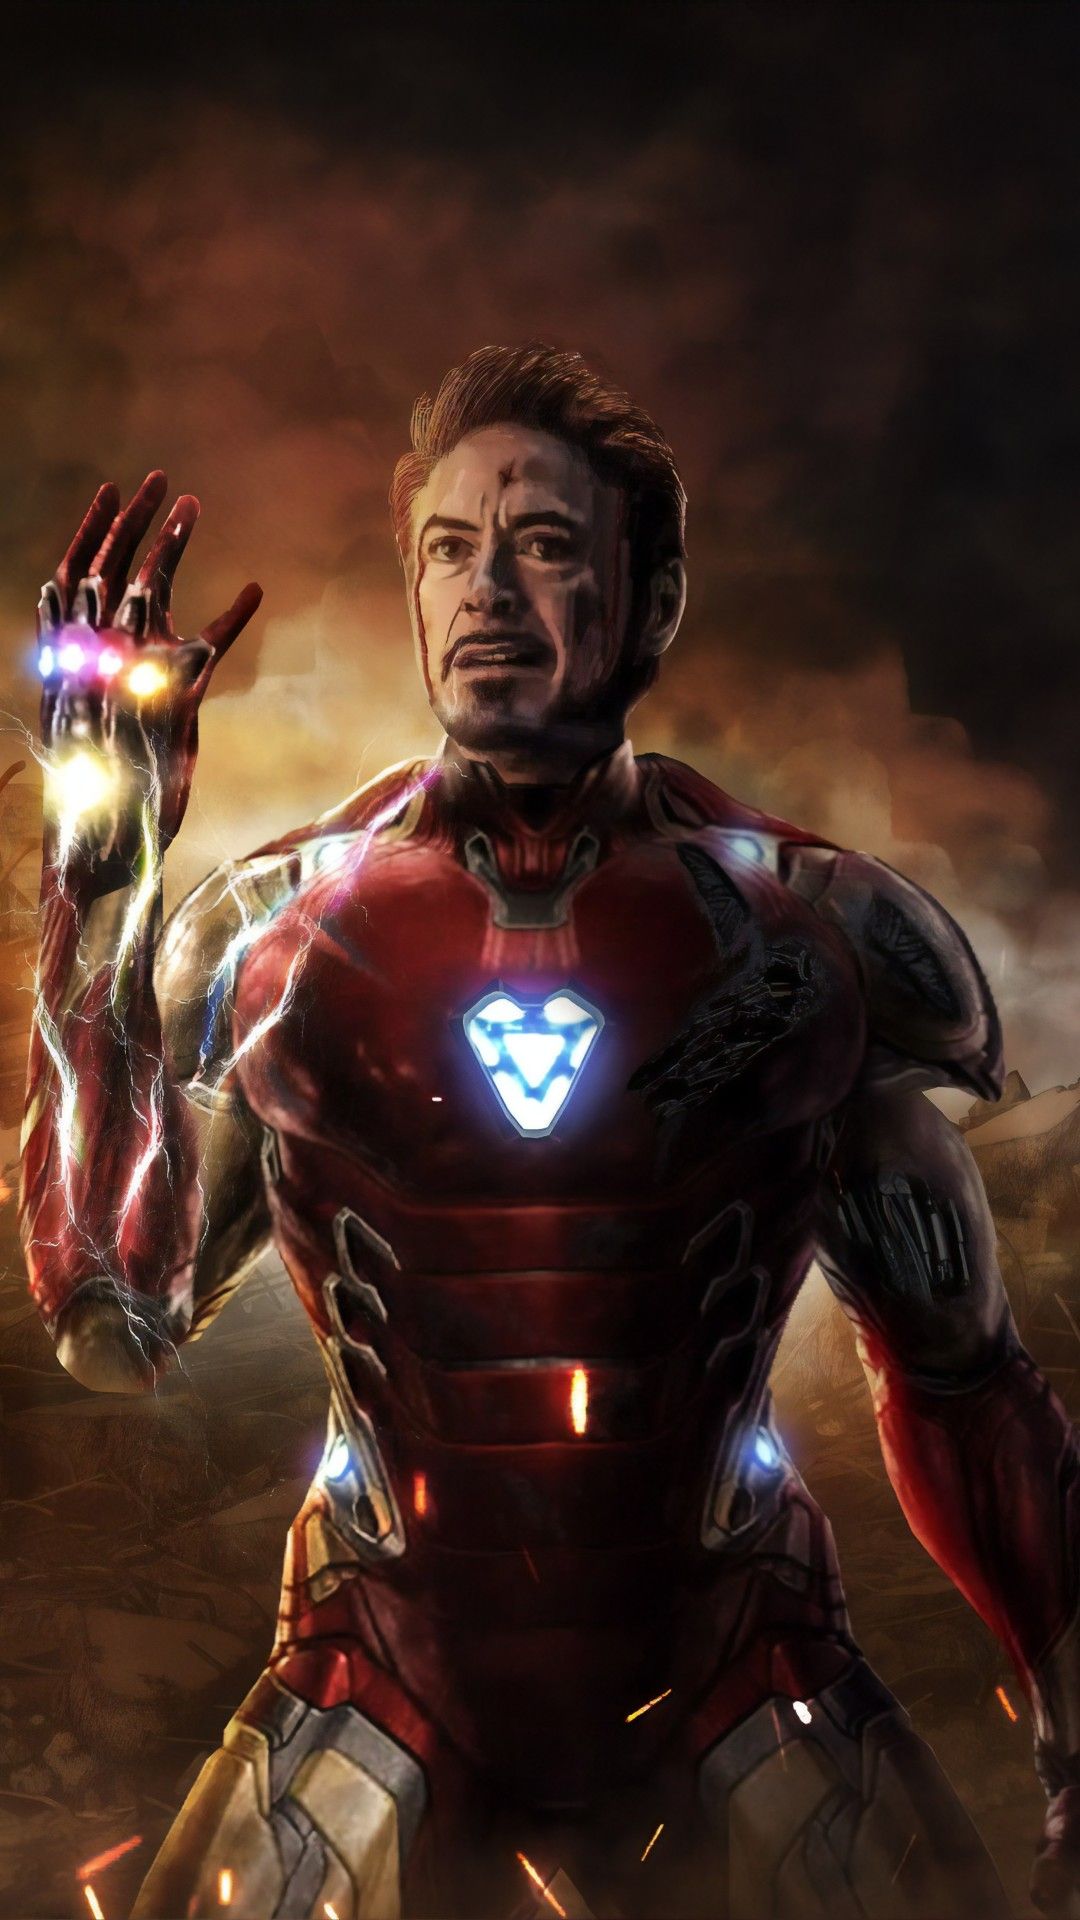 Tony Stark Iron Man htc one wallpaper, free and easy to download